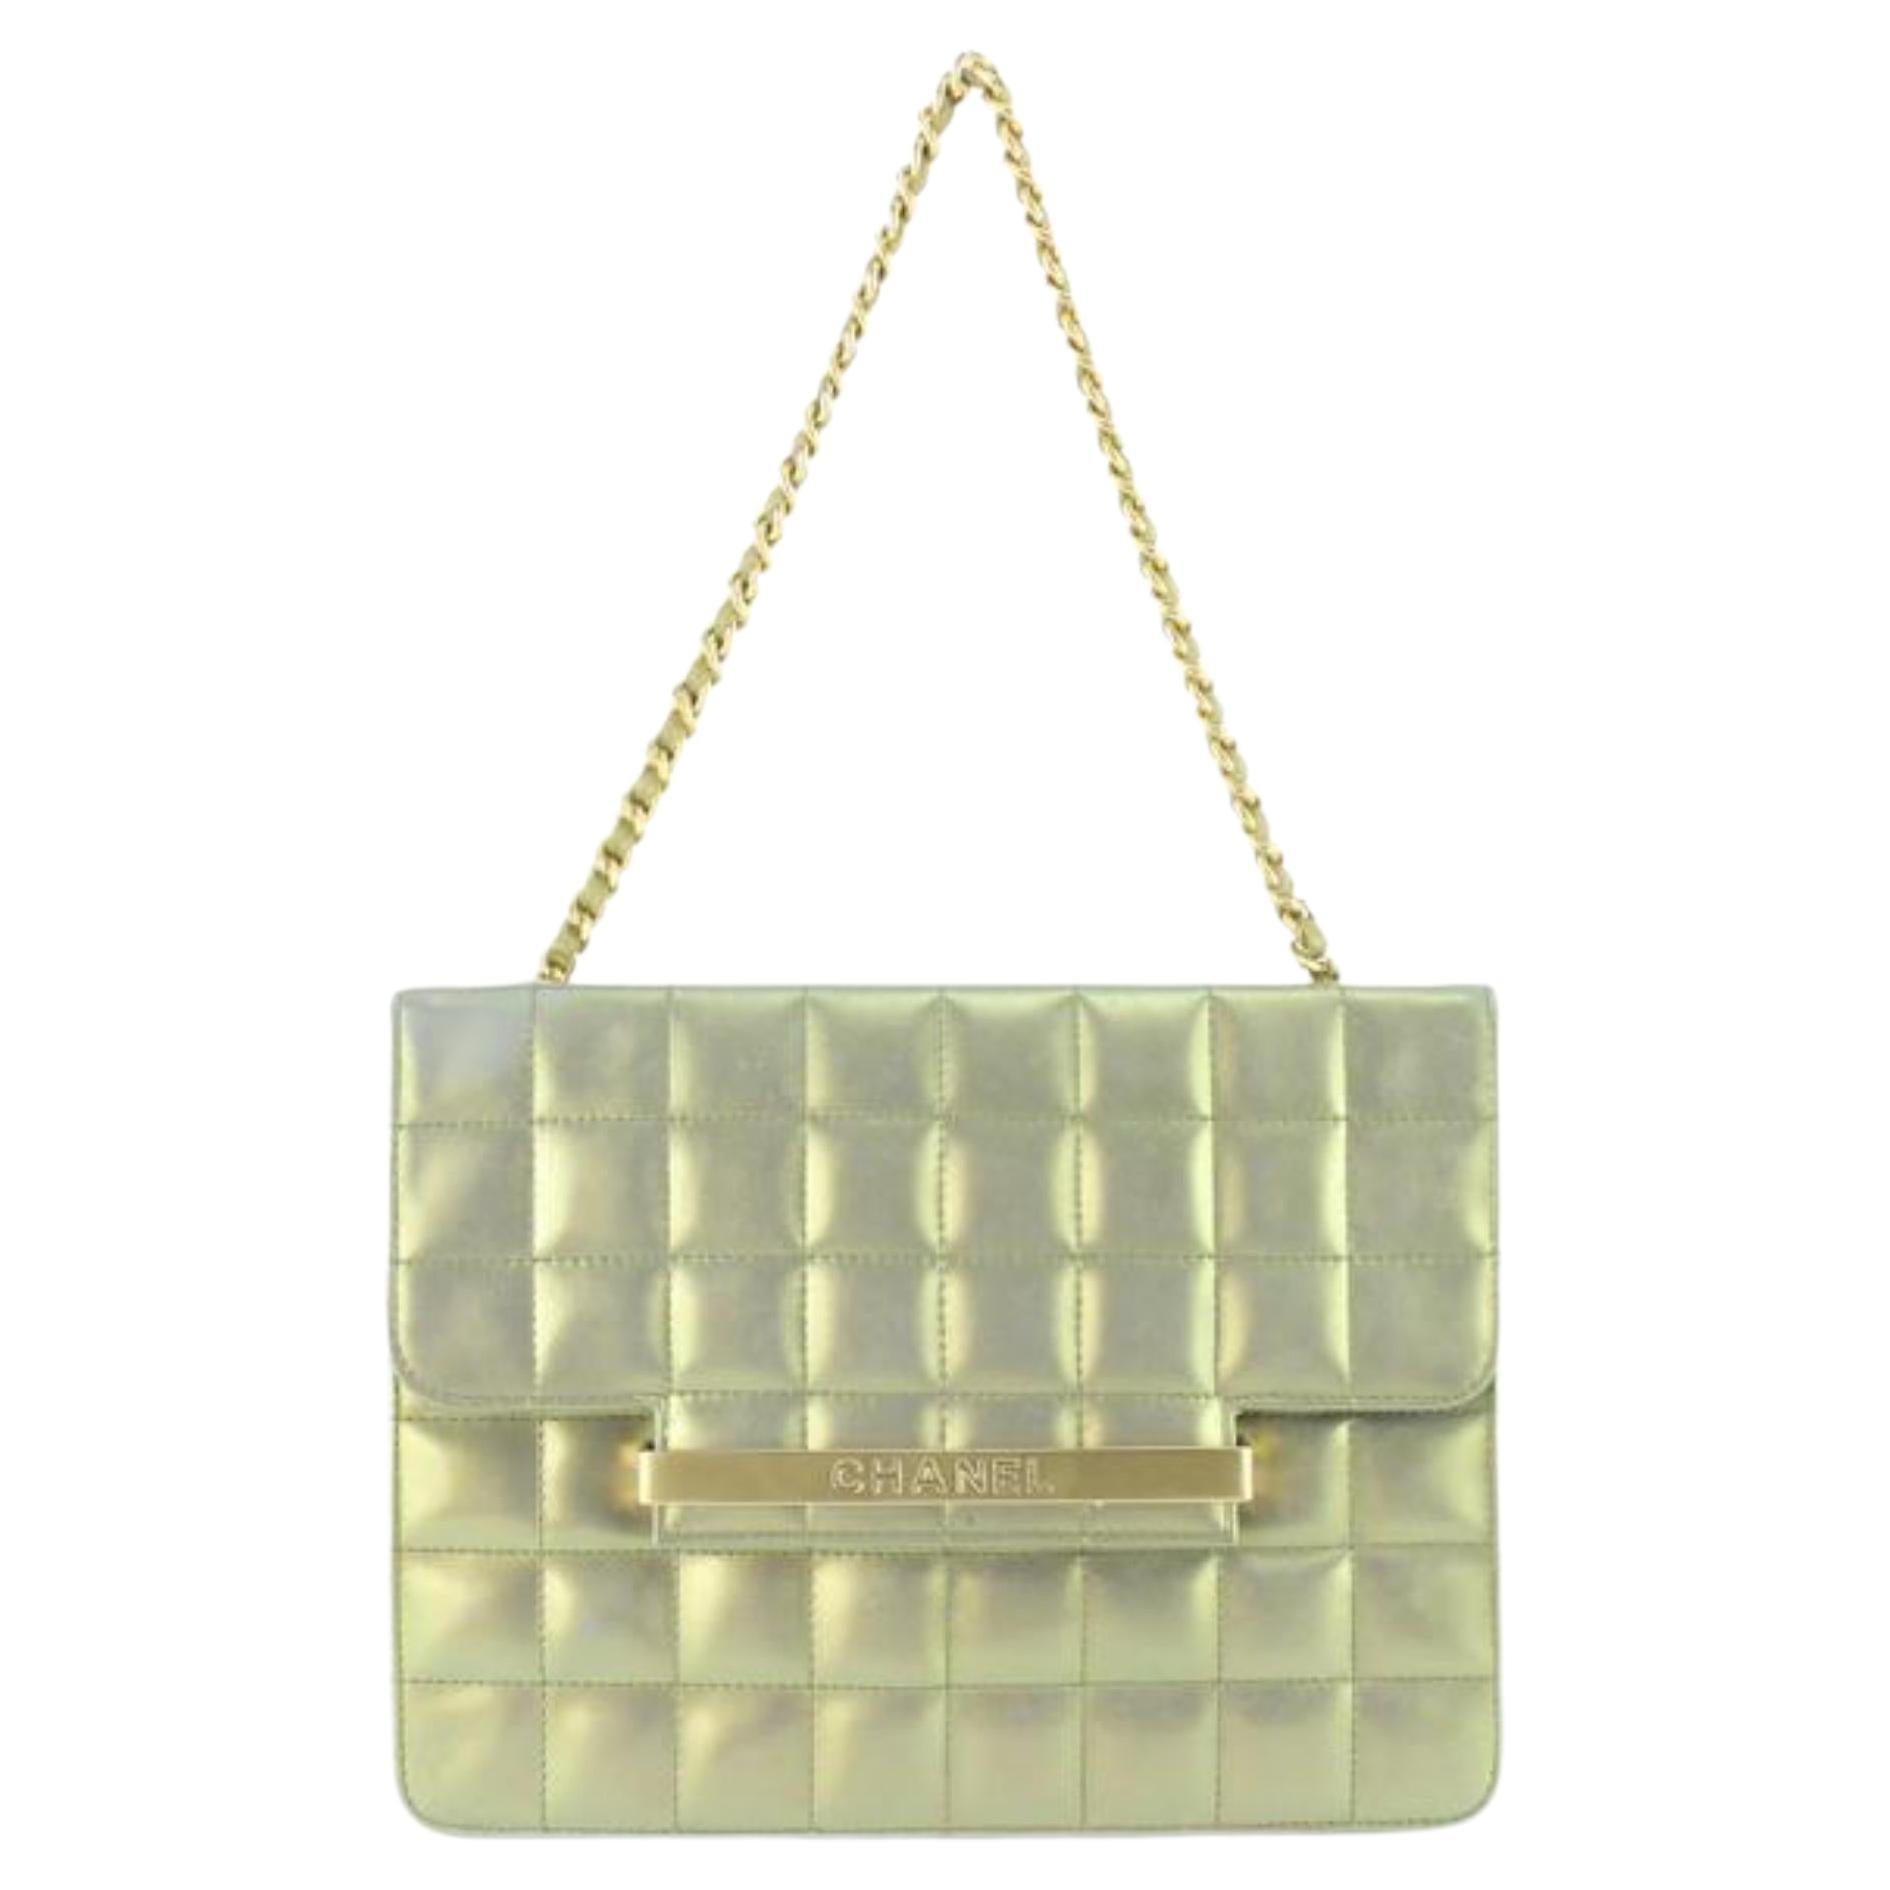 White Quilted Chanel Style Clutch